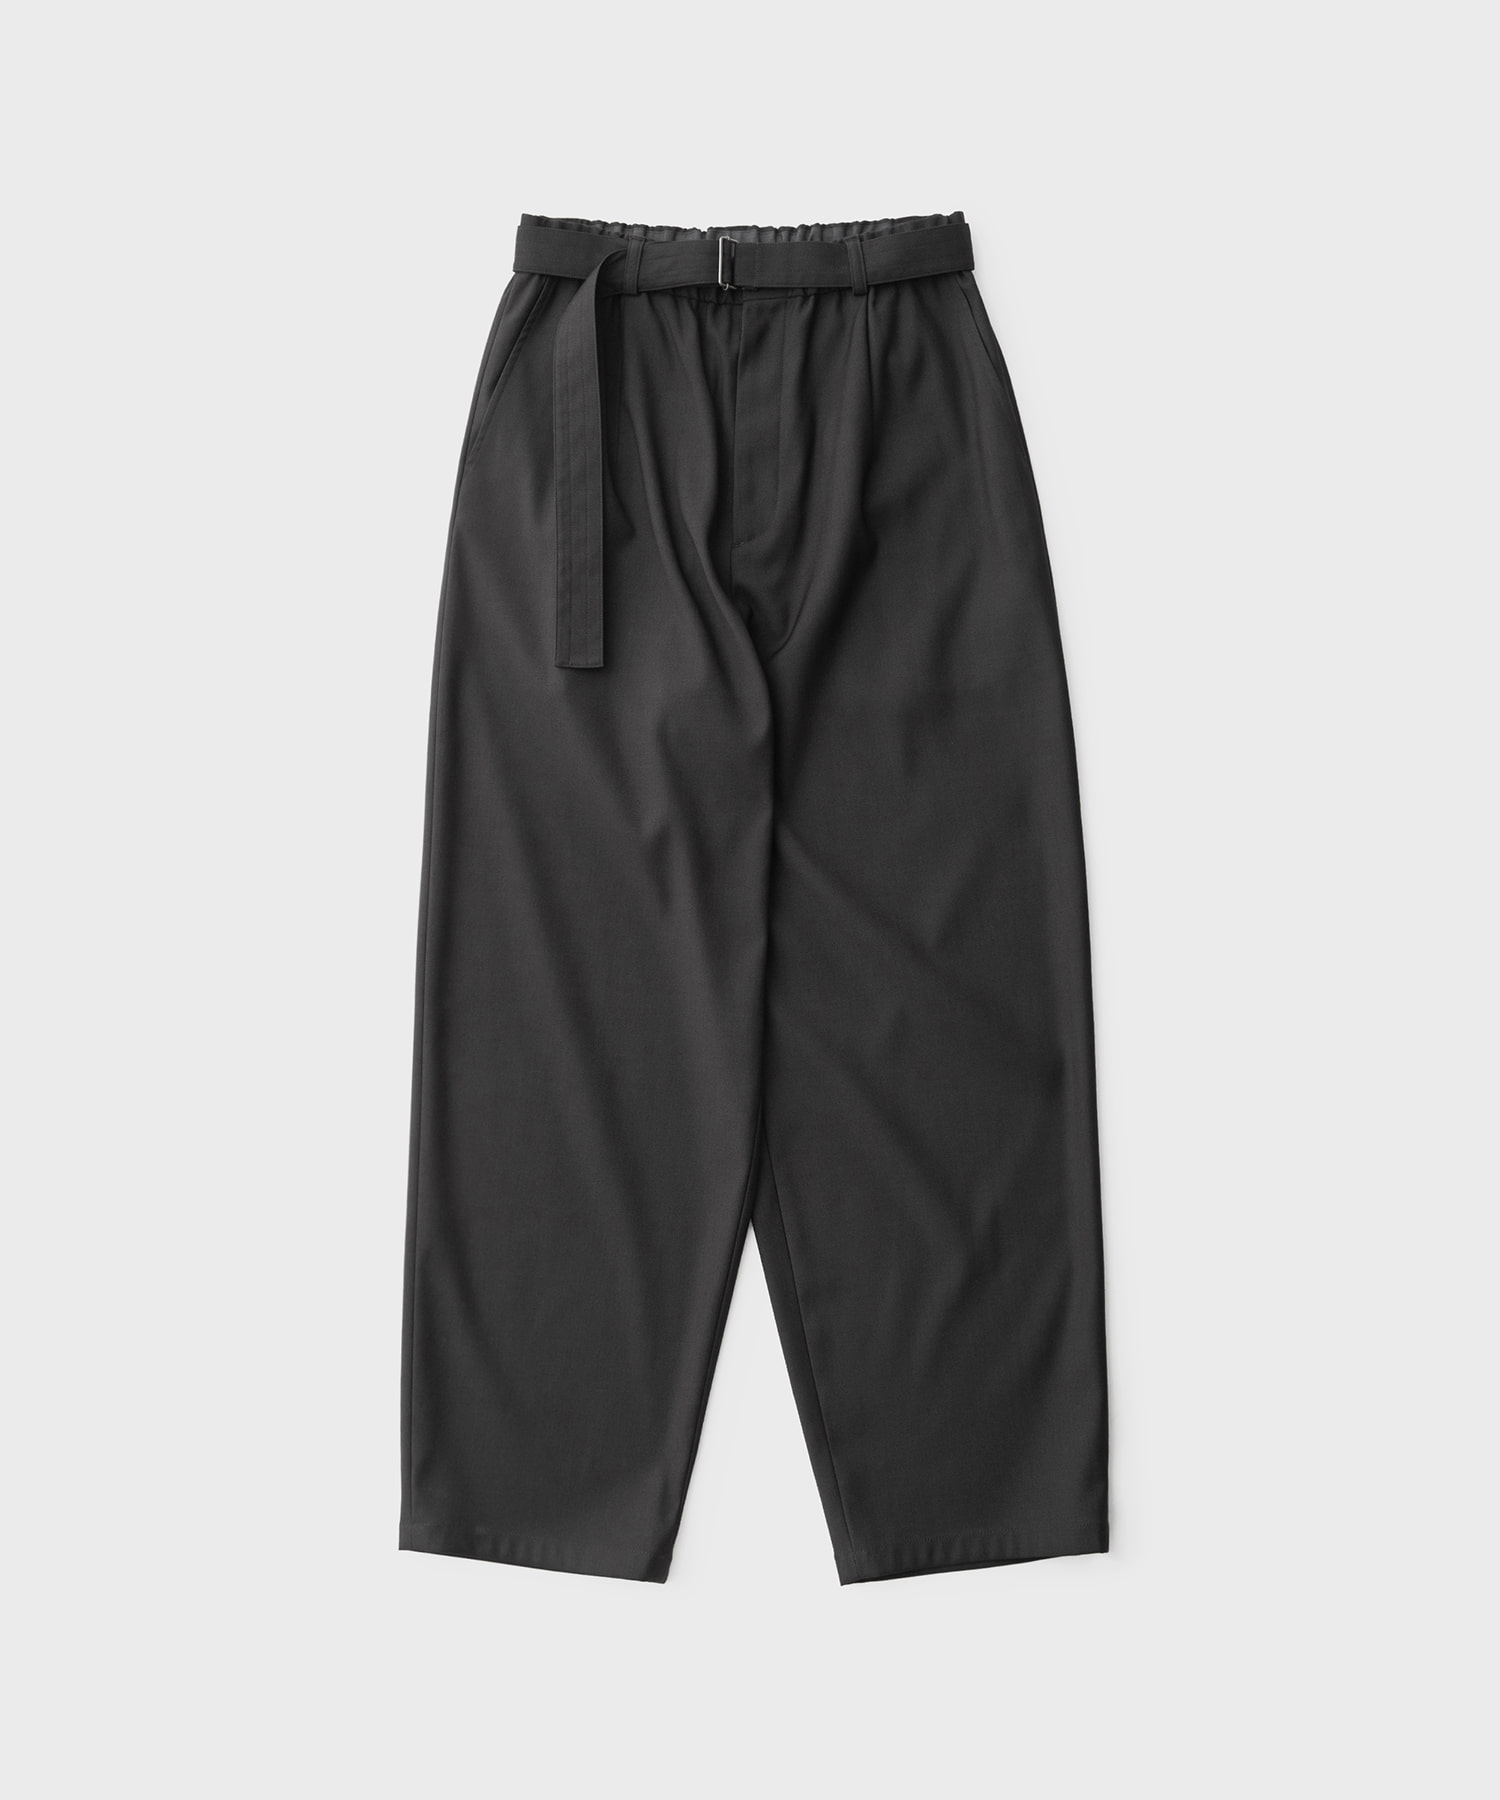 22AW Cocoon Banded Pants (Charcoal)